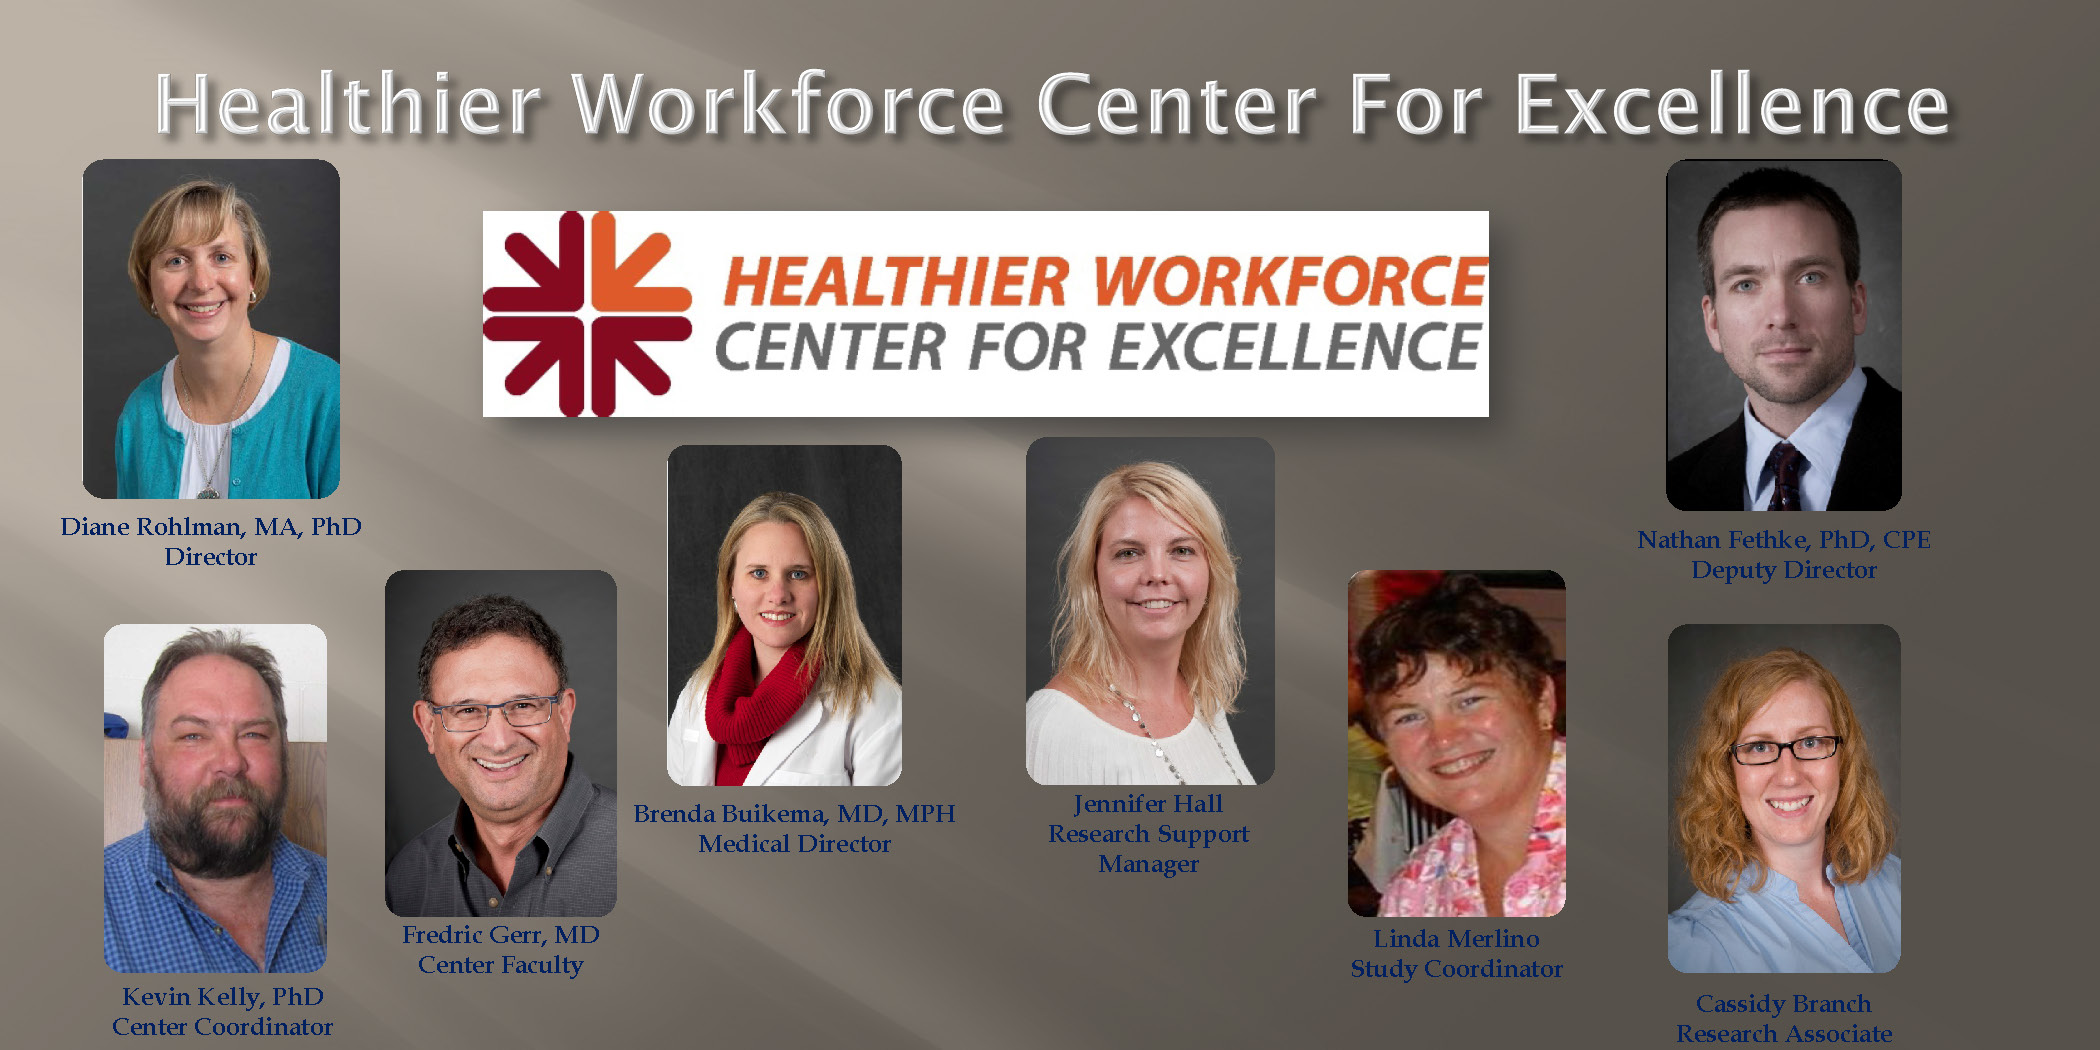 Healthier Workforce Center For Excellence